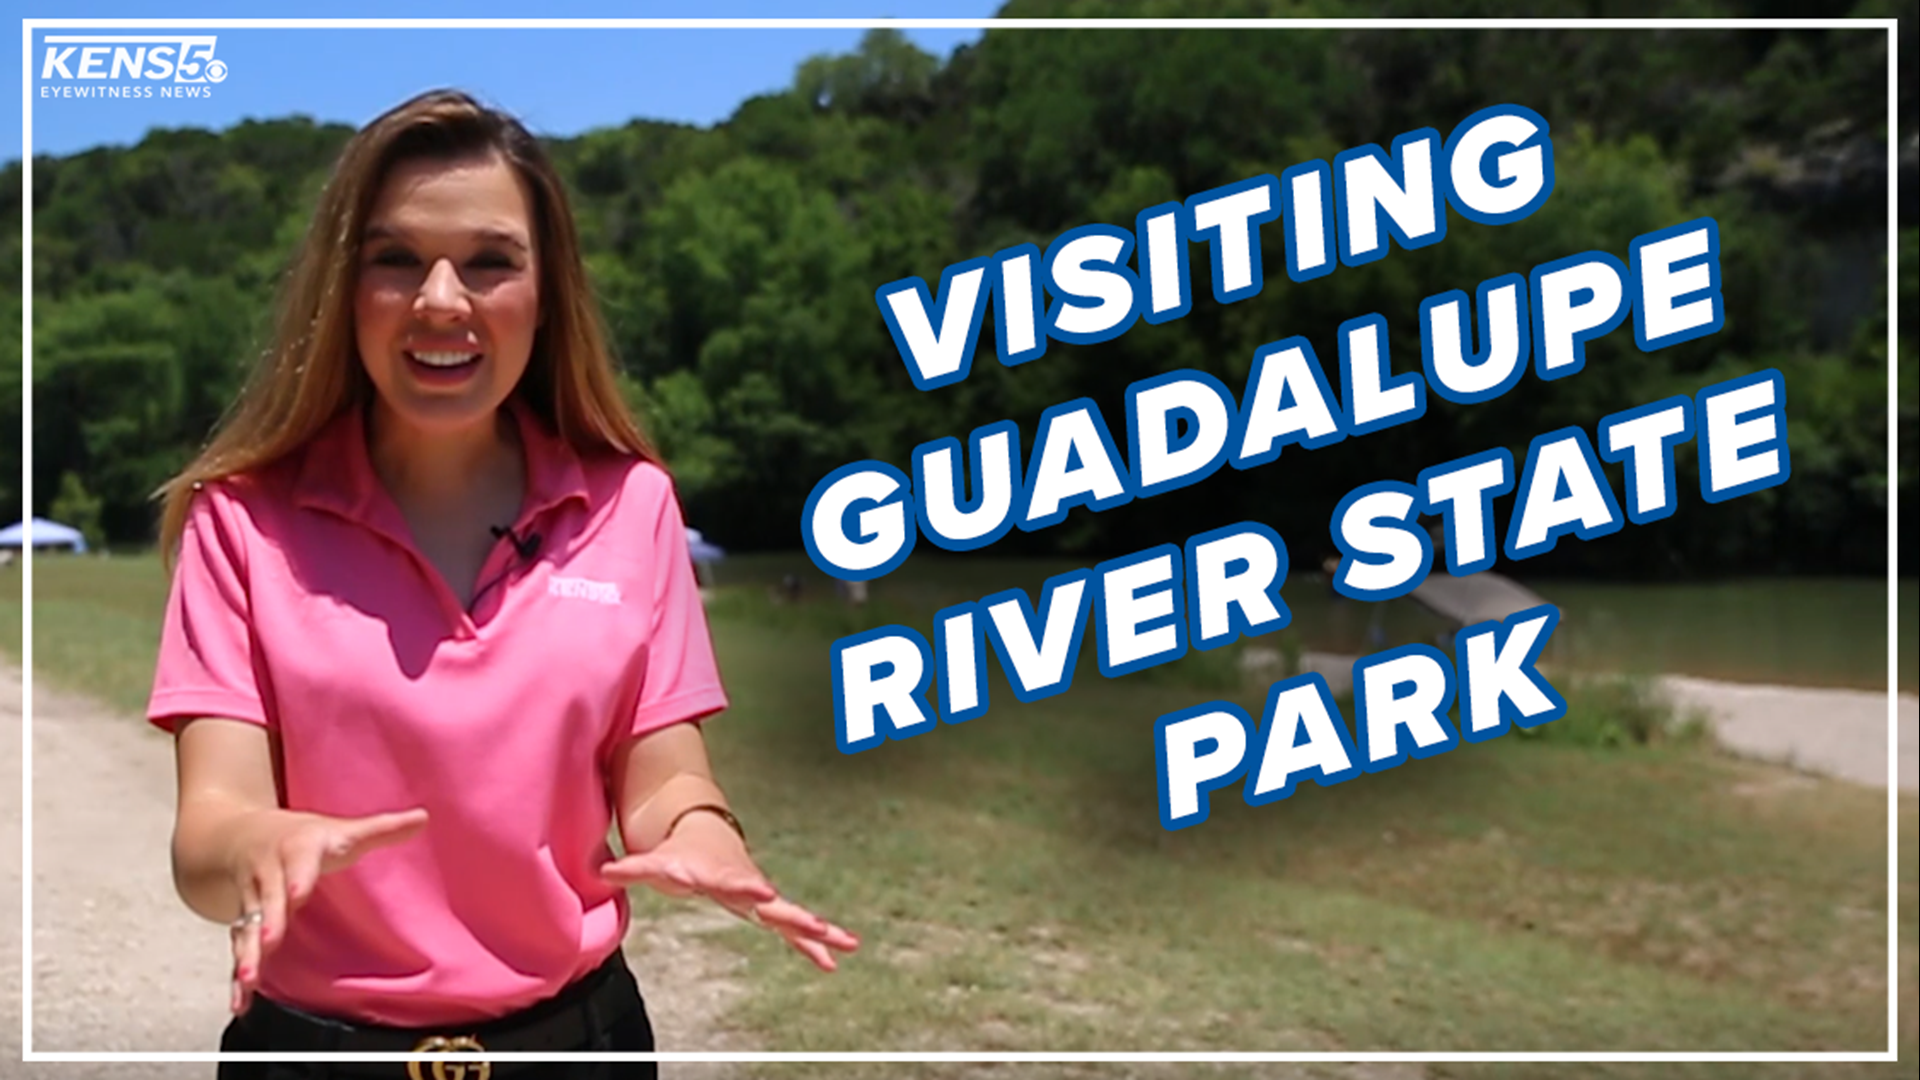 If you're looking to beat the heat, you can visit Guadalupe River State. But don't forget to make a reservation! Digital journalist Lexi Hazlett takes you there.